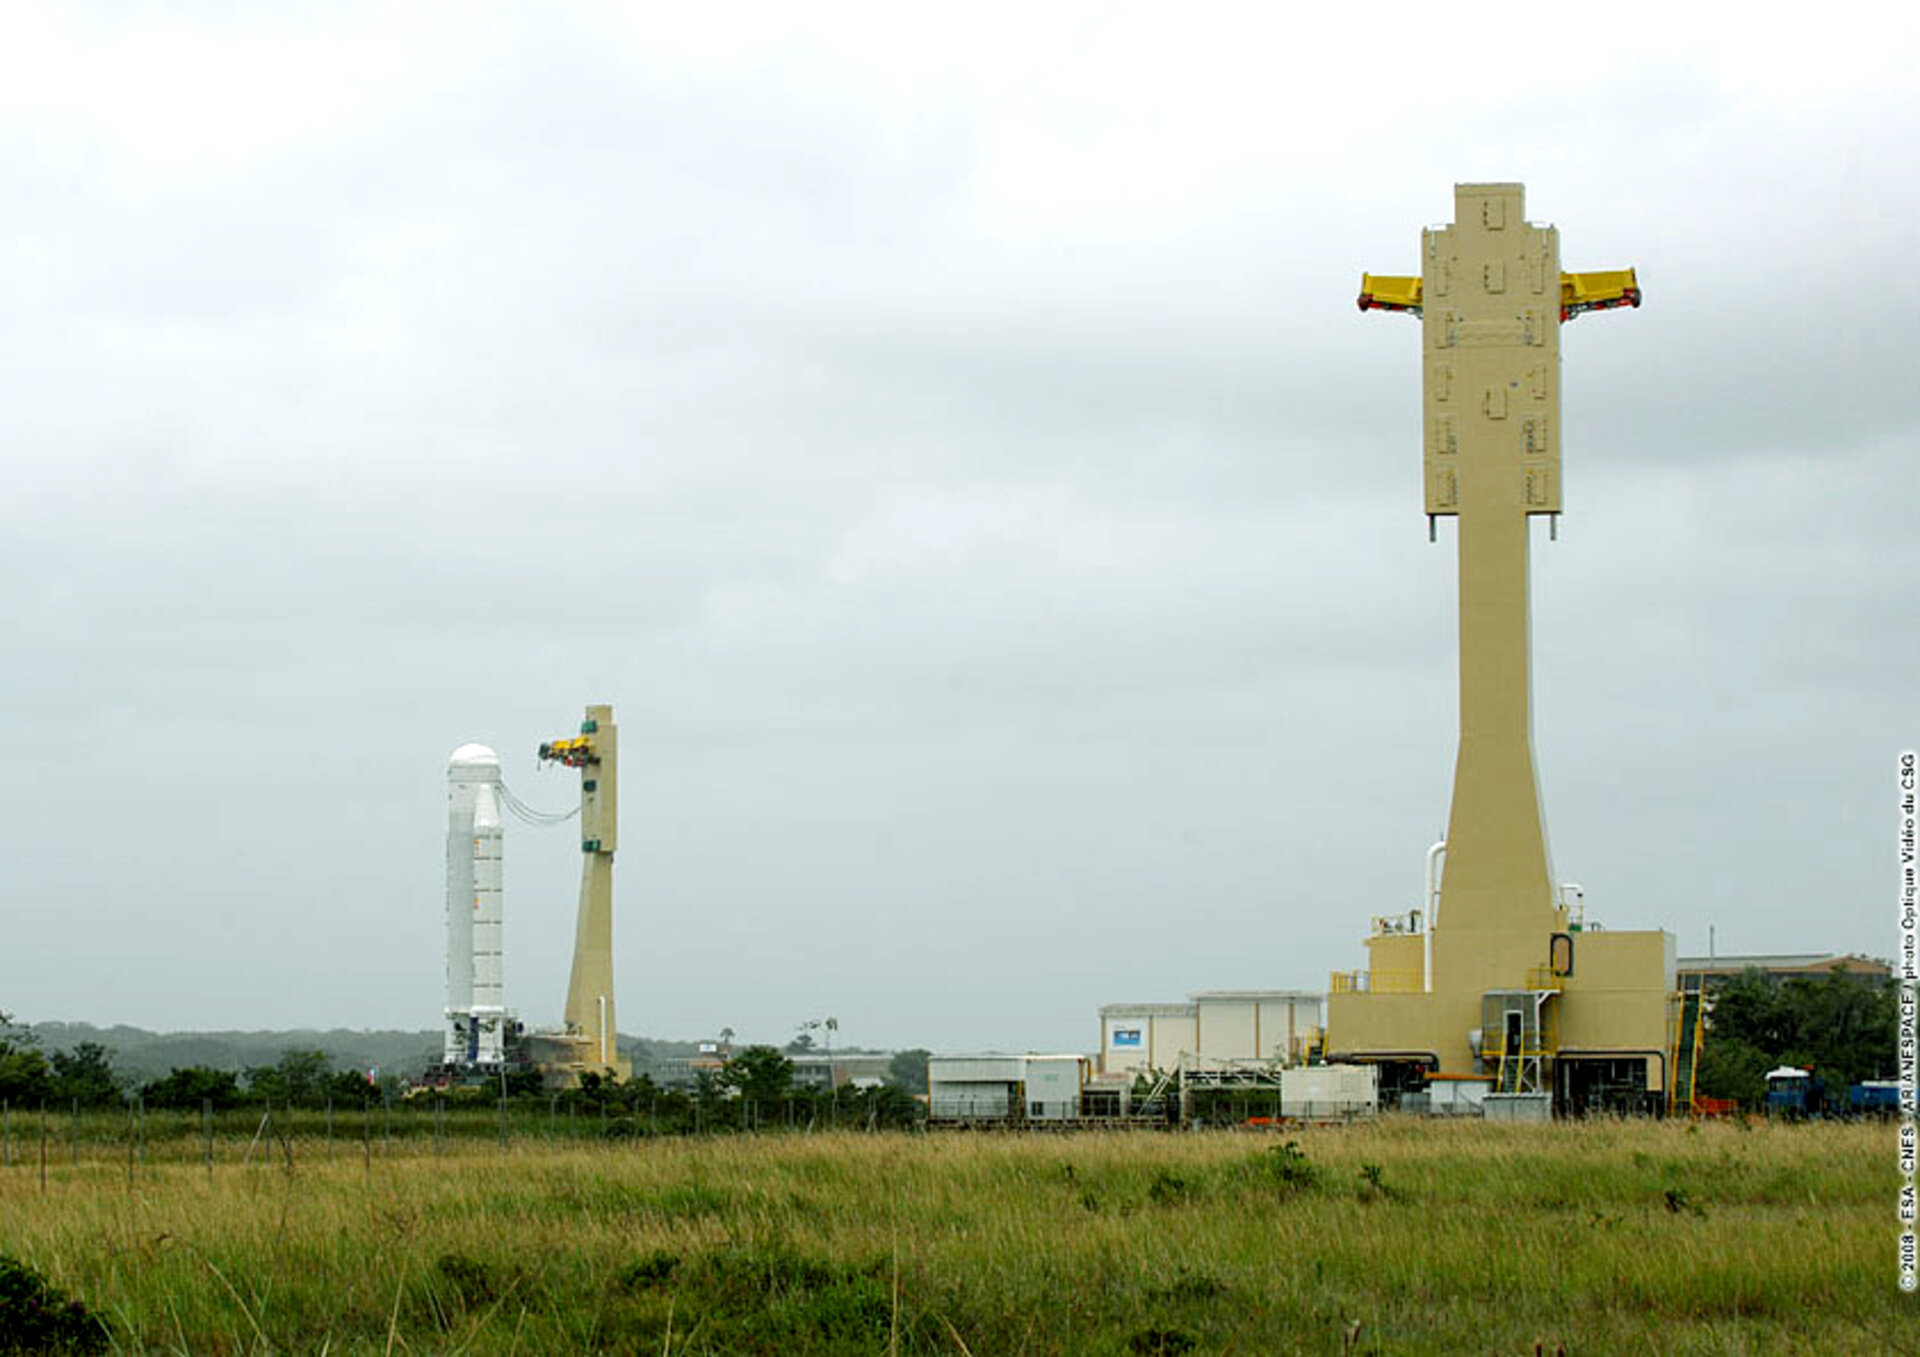 Transfer of the Ariane 5 ES launcher for Jules Verne to the Final Assembly Building at Europe's Spaceport in Kourou